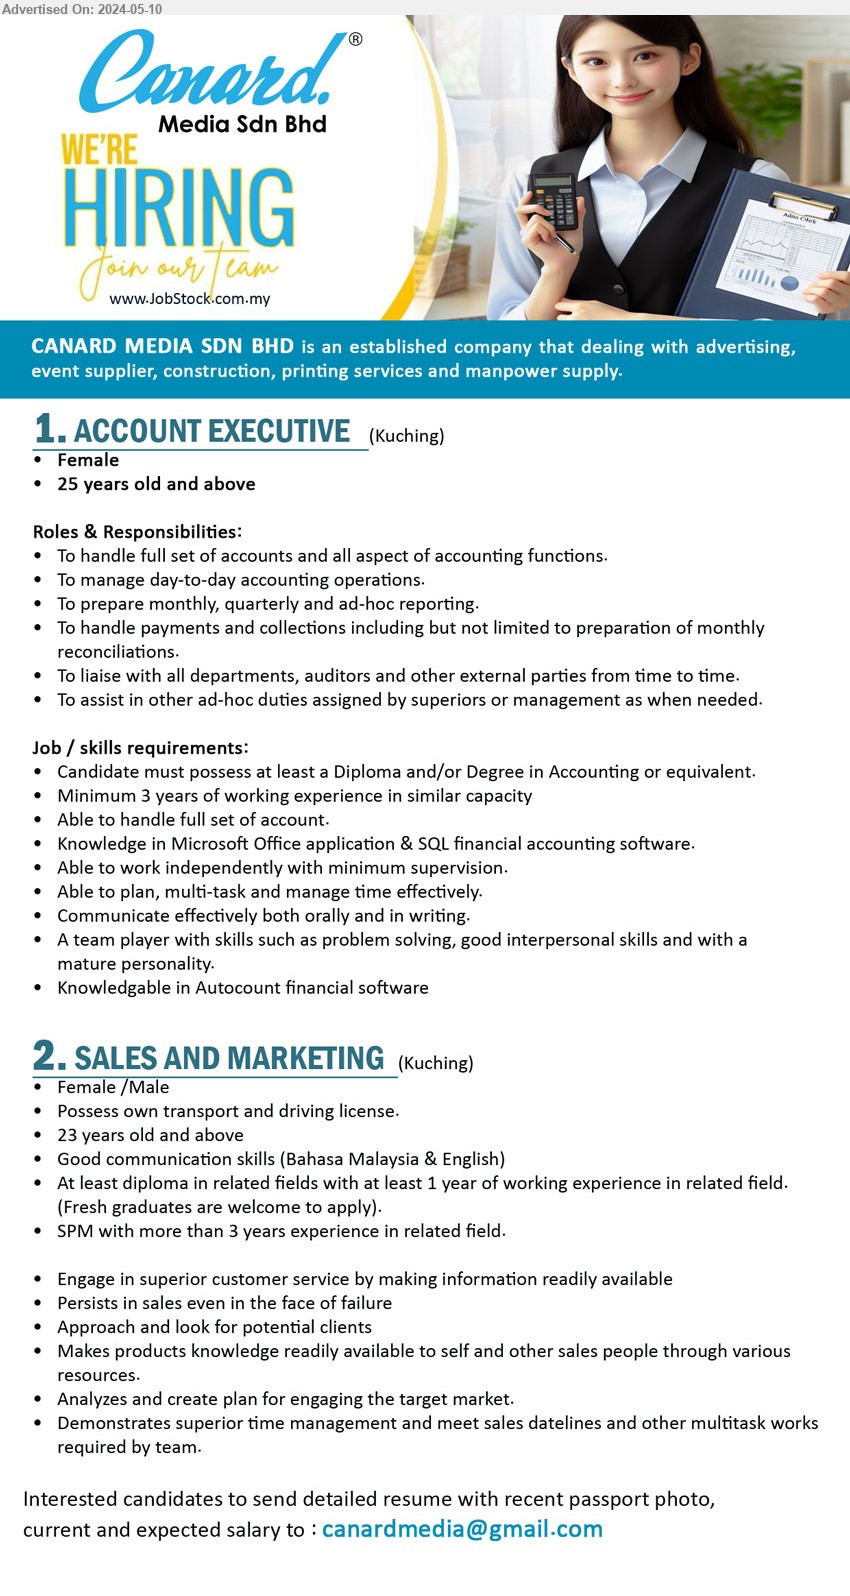 CANARD MEDIA SDN BHD - 1. ACCOUNT EXECUTIVE (Kuching), Diploma and/or Degree in Accounting or equivalent, Minimum 3 yrs. exp.,...
2. SALES AND MARKETING (Kuching), diploma in related fields with at least 1 yr. exp., SPM with more than 3 yrs. exp.,...
Email resume to ....
